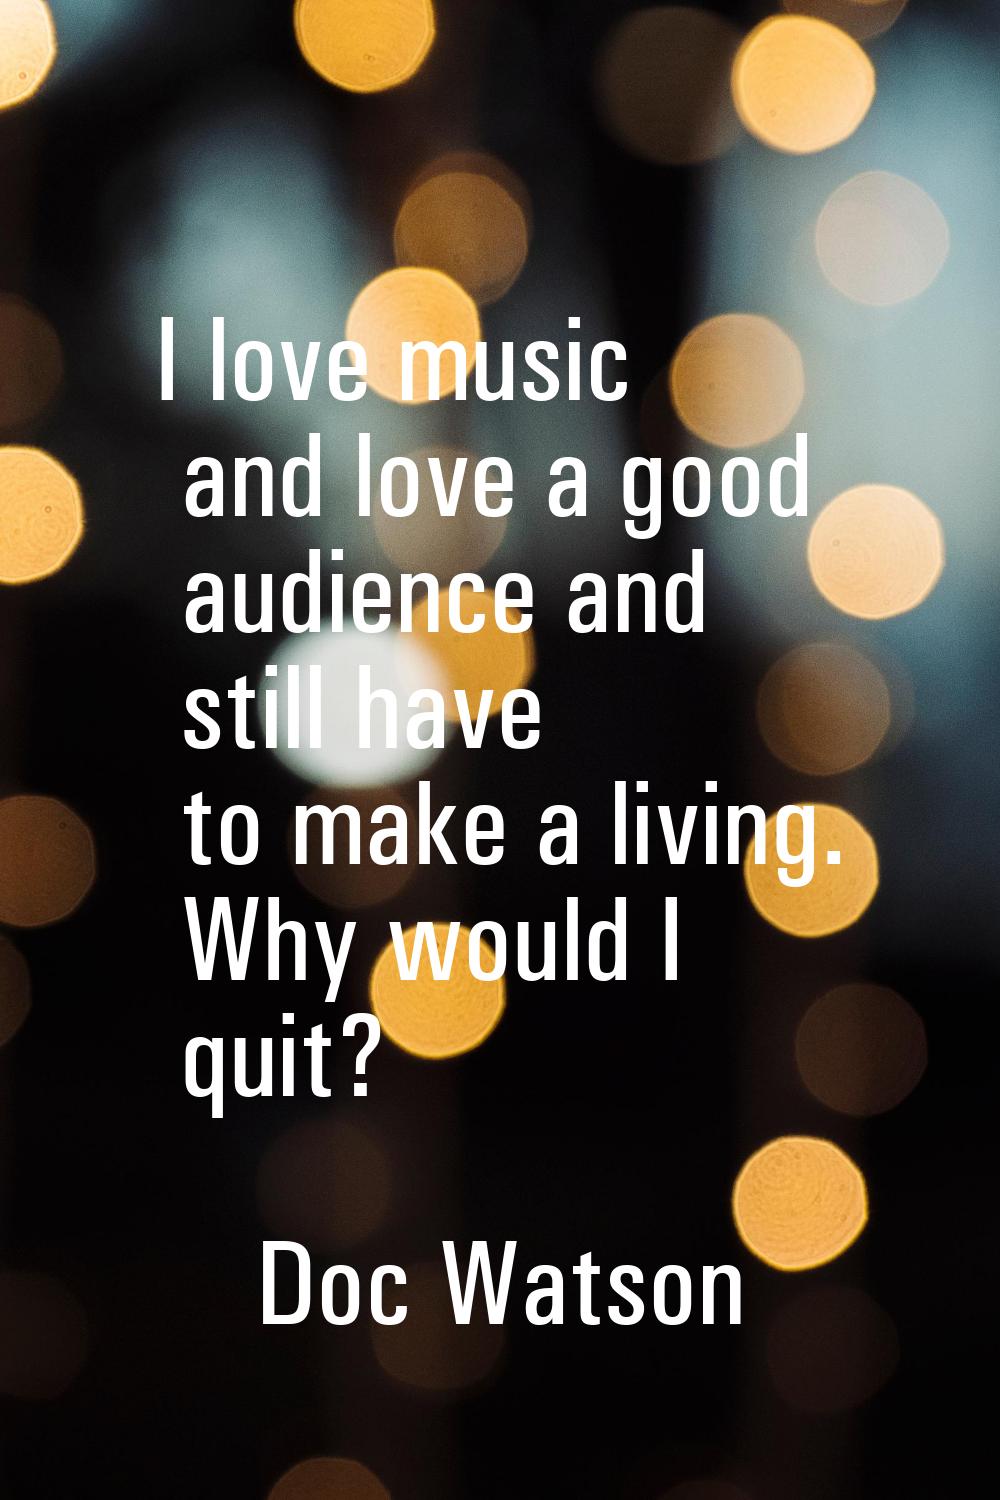 I love music and love a good audience and still have to make a living. Why would I quit?